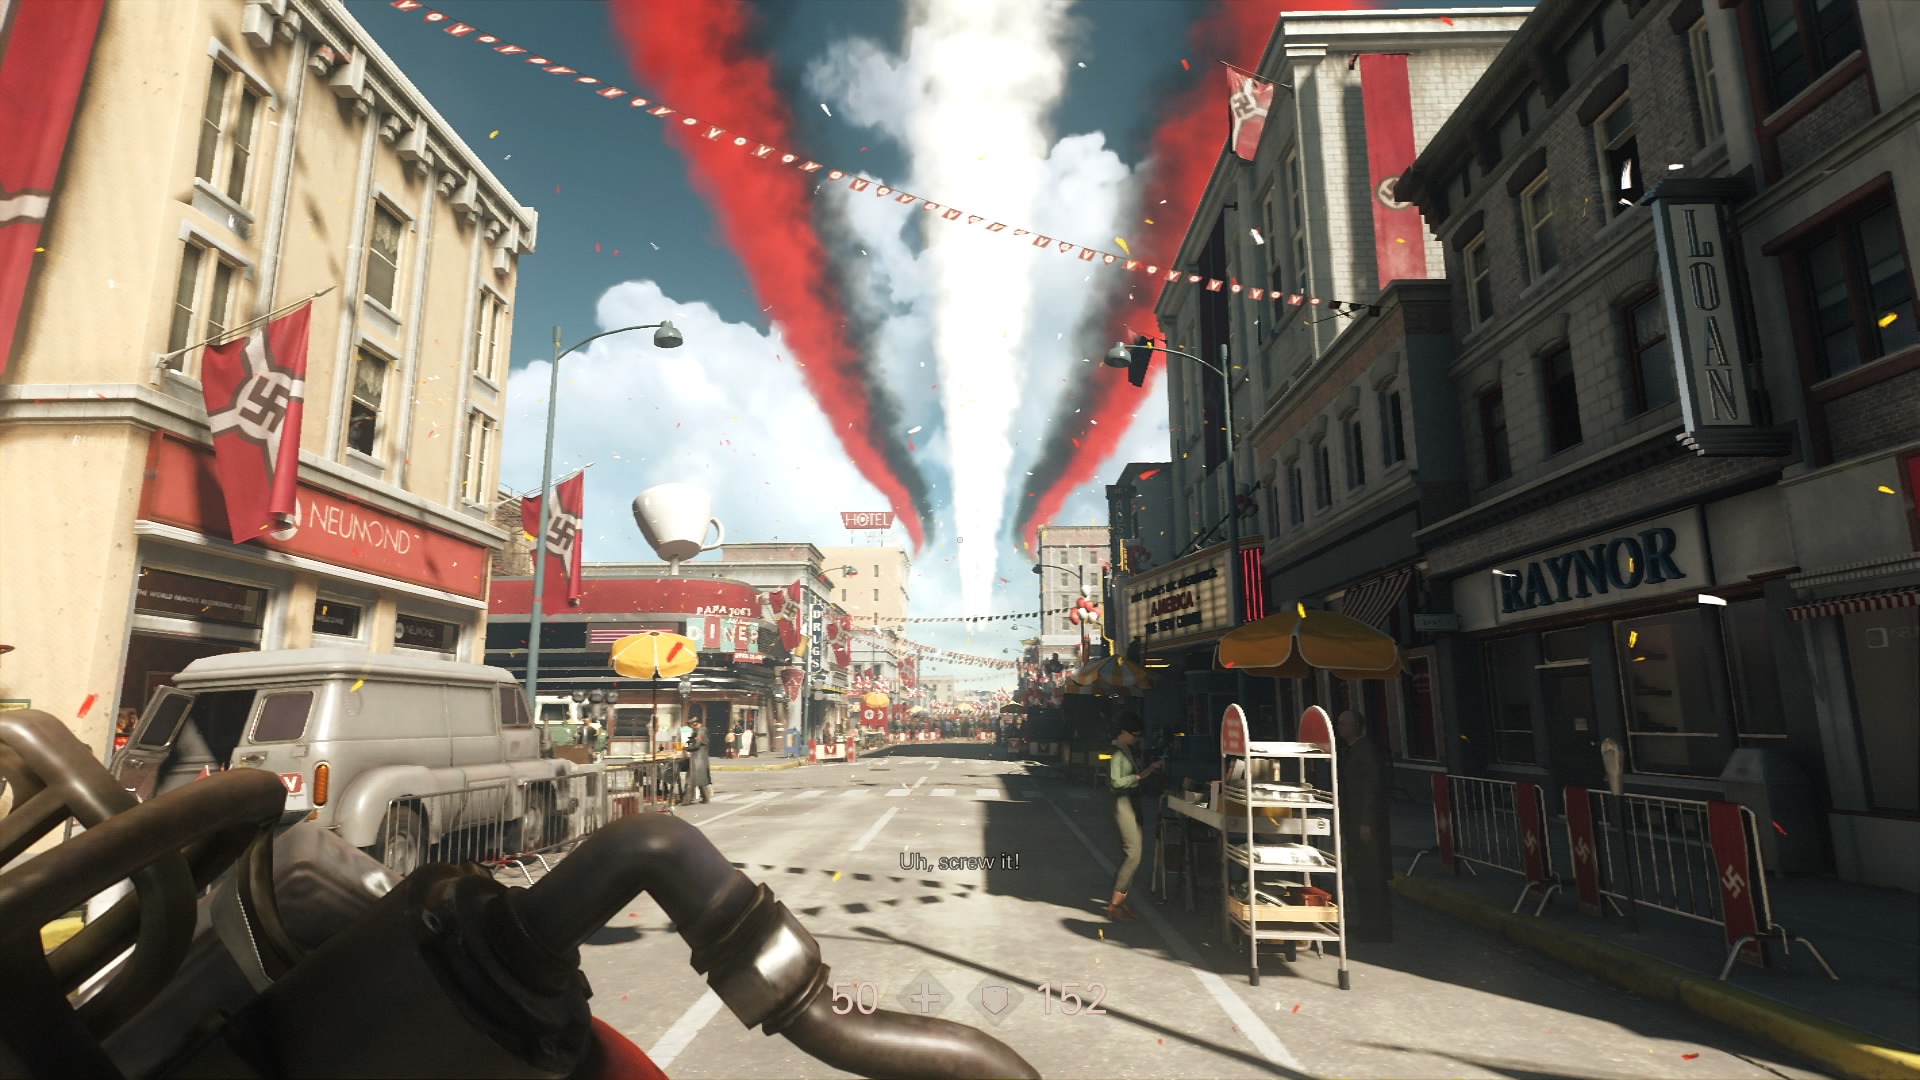 wolfenstein the new colossus guide